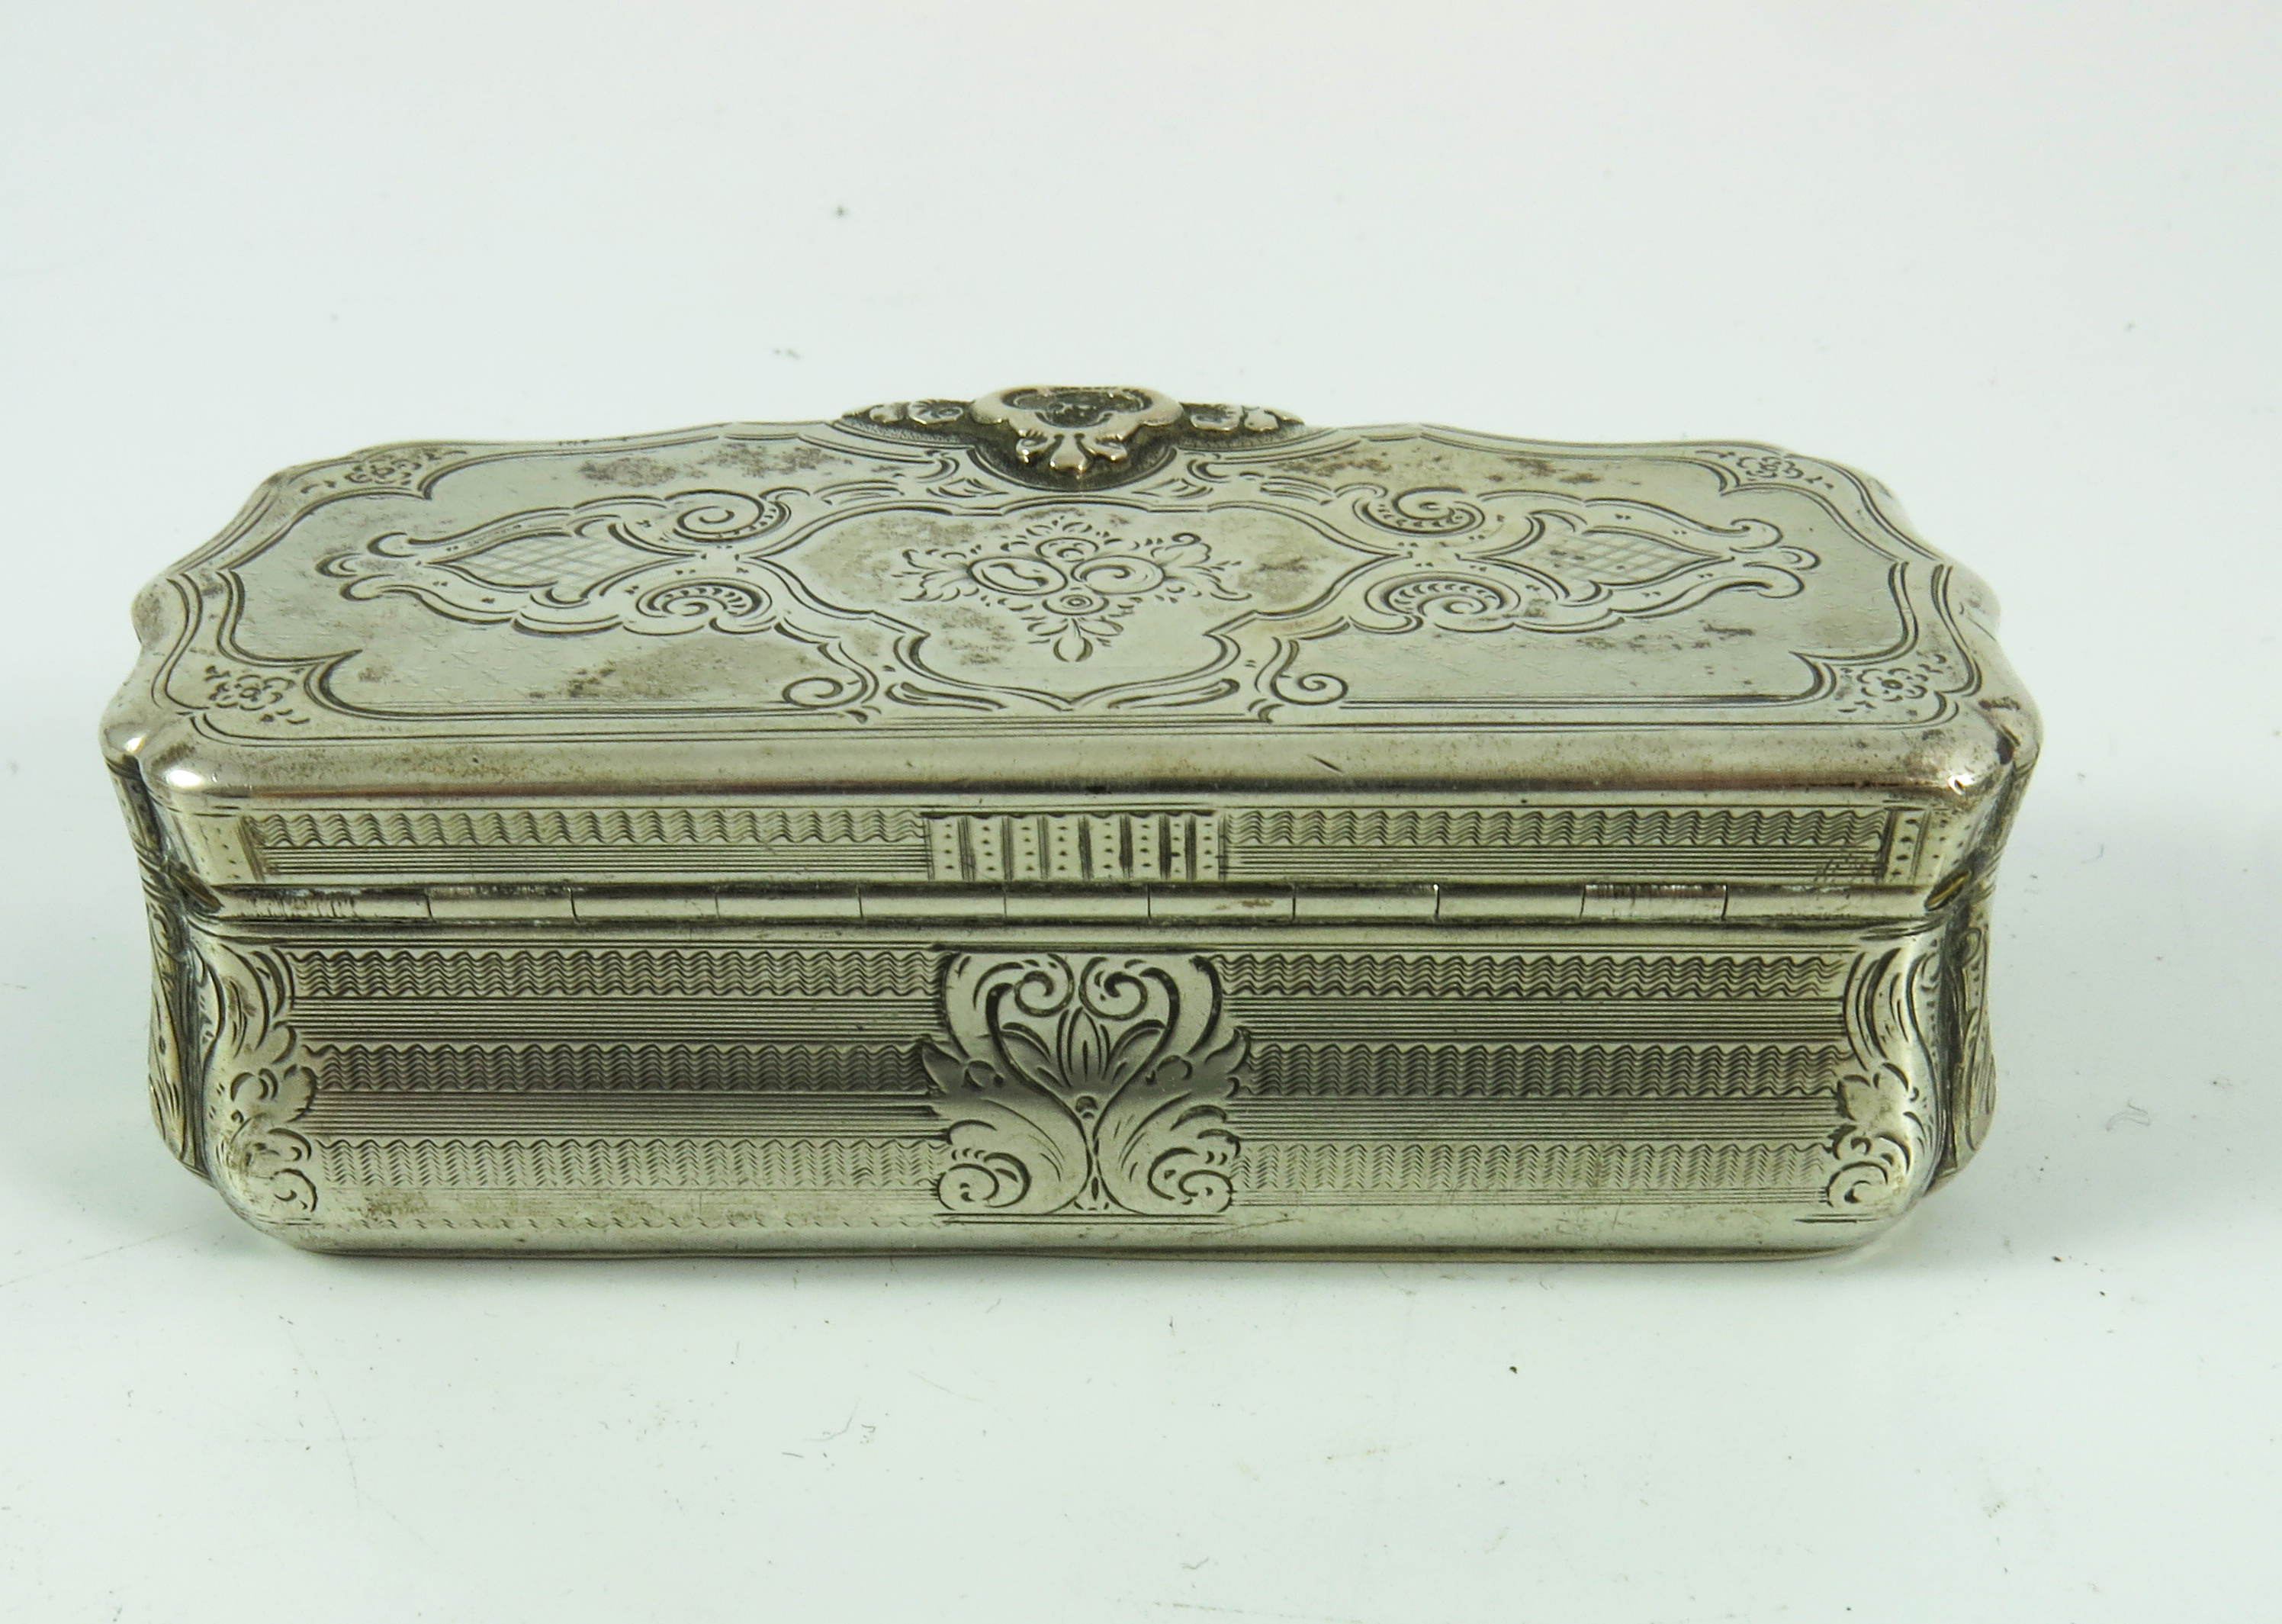 CONTINENTAL, POSSIBLY DUTCH, WHITE METAL TRINKET BOX WITH HINGED COVER - Image 2 of 6